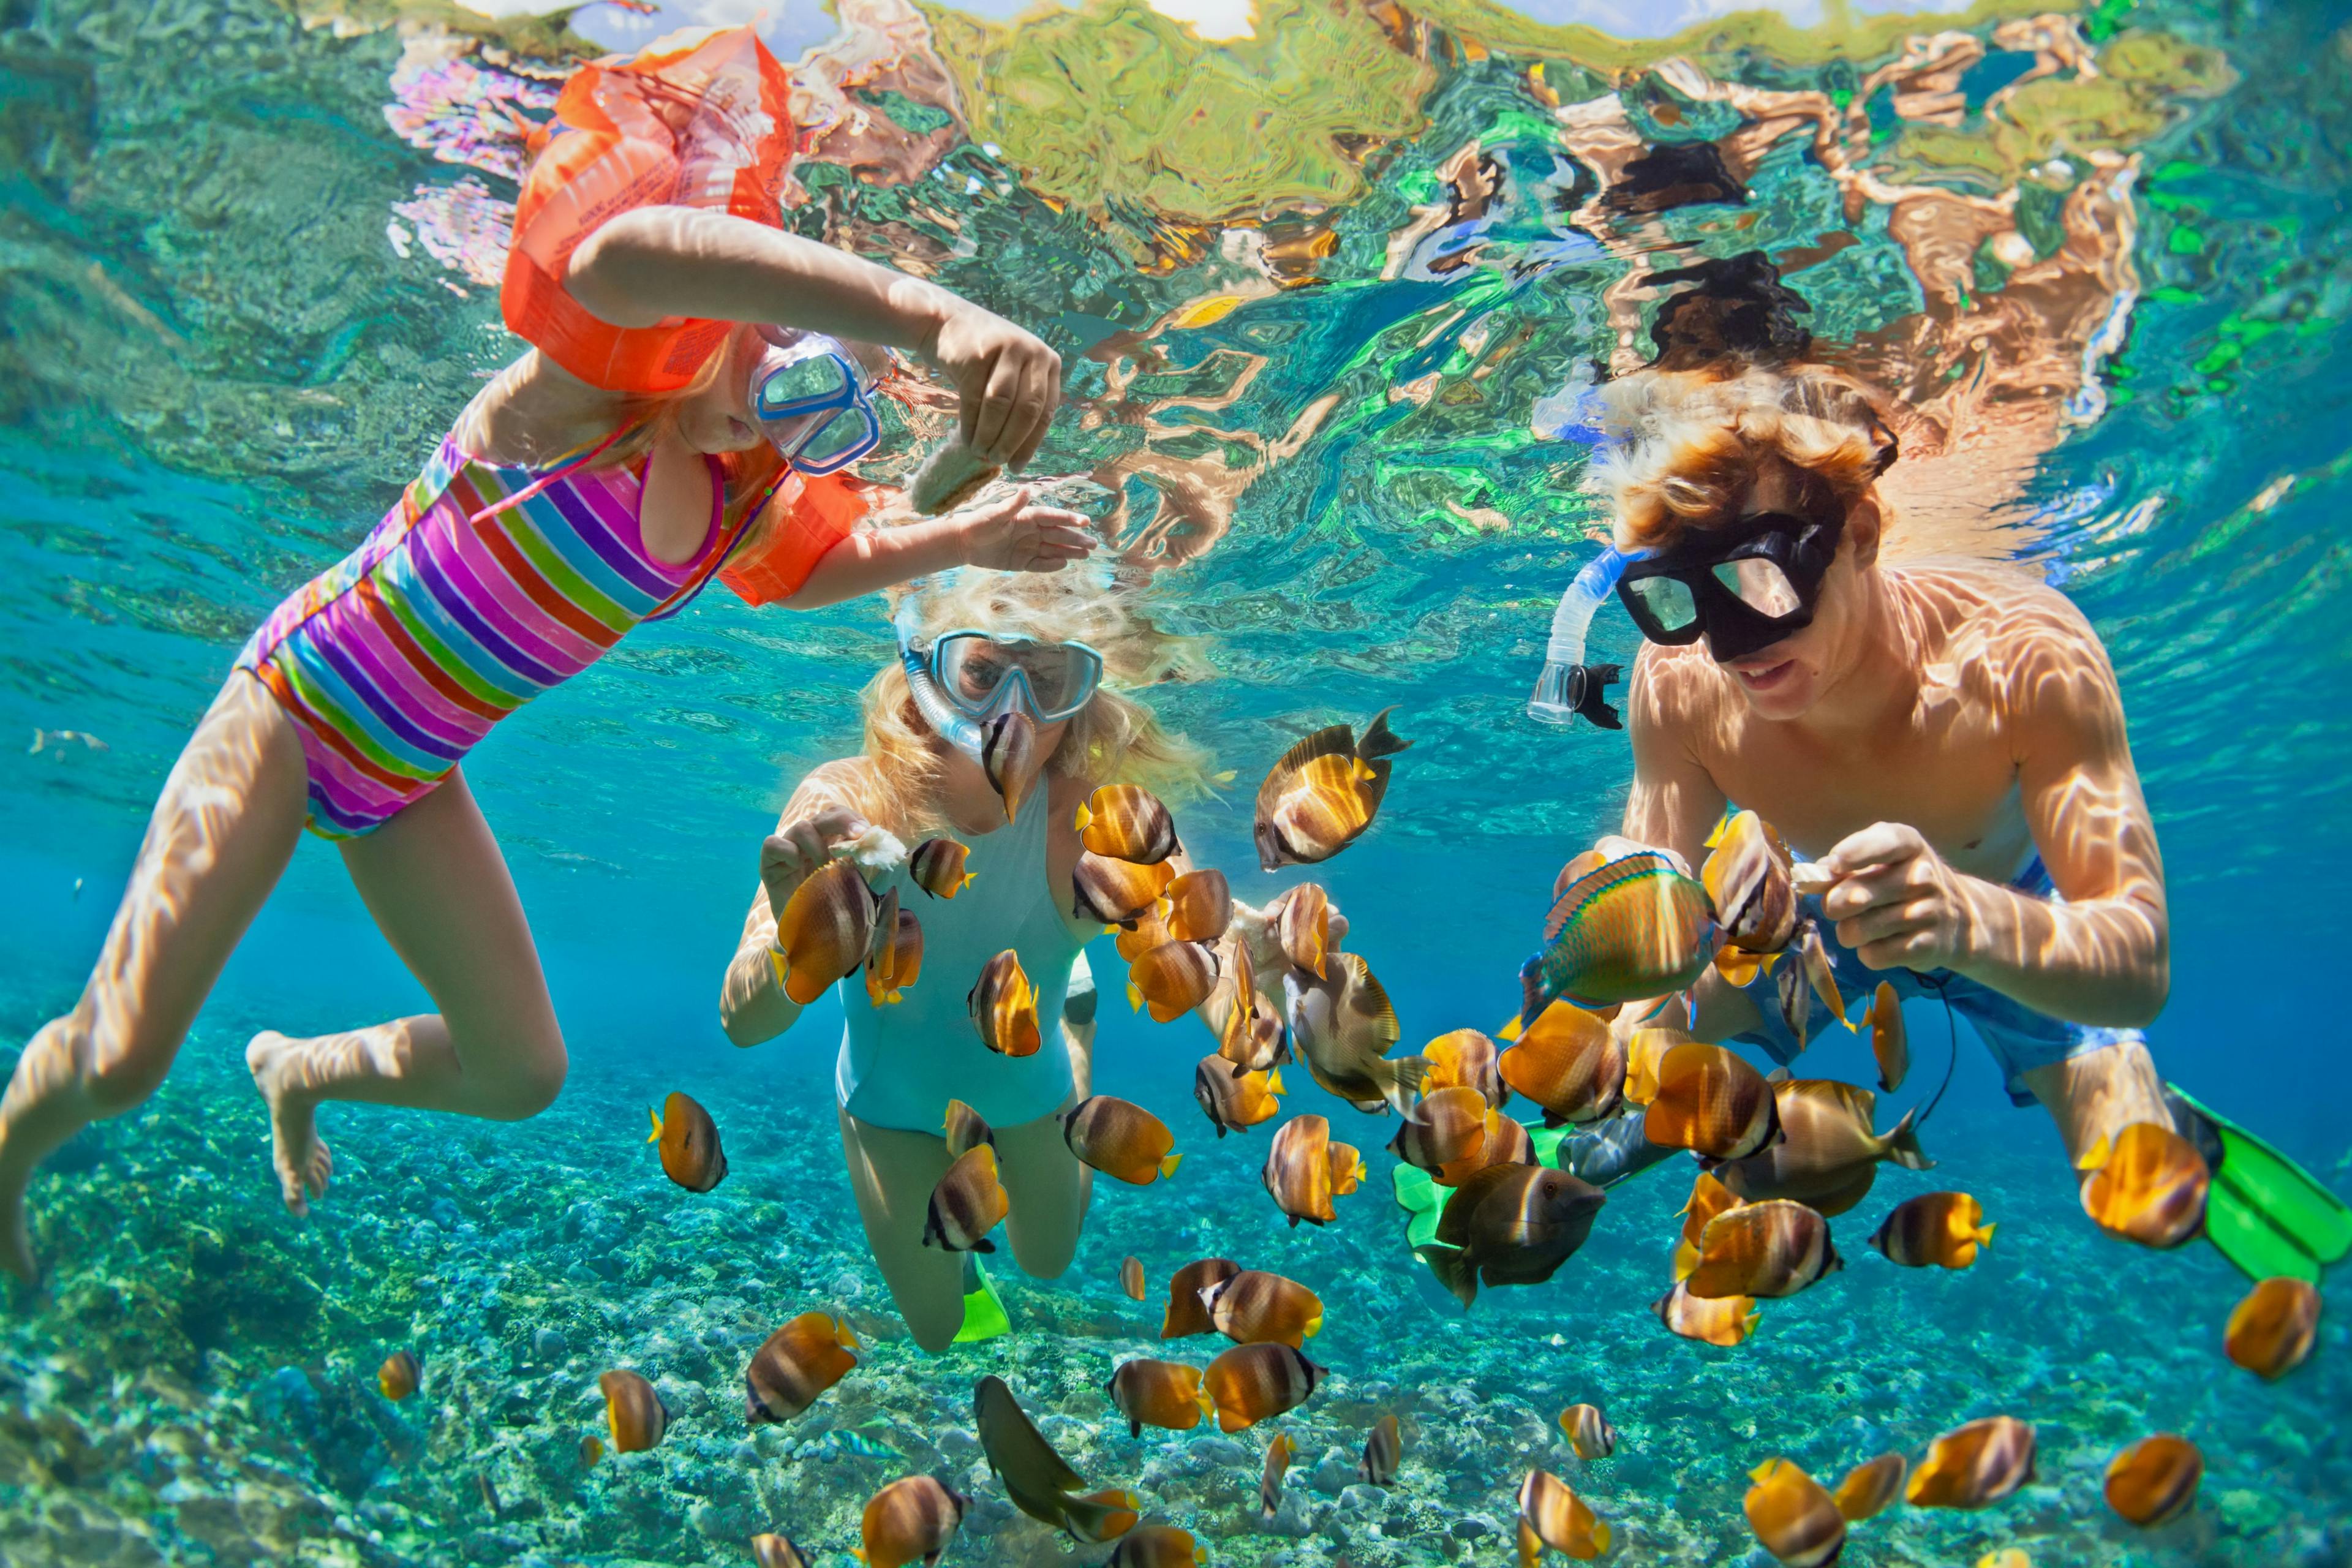 Snorkeling and Diving